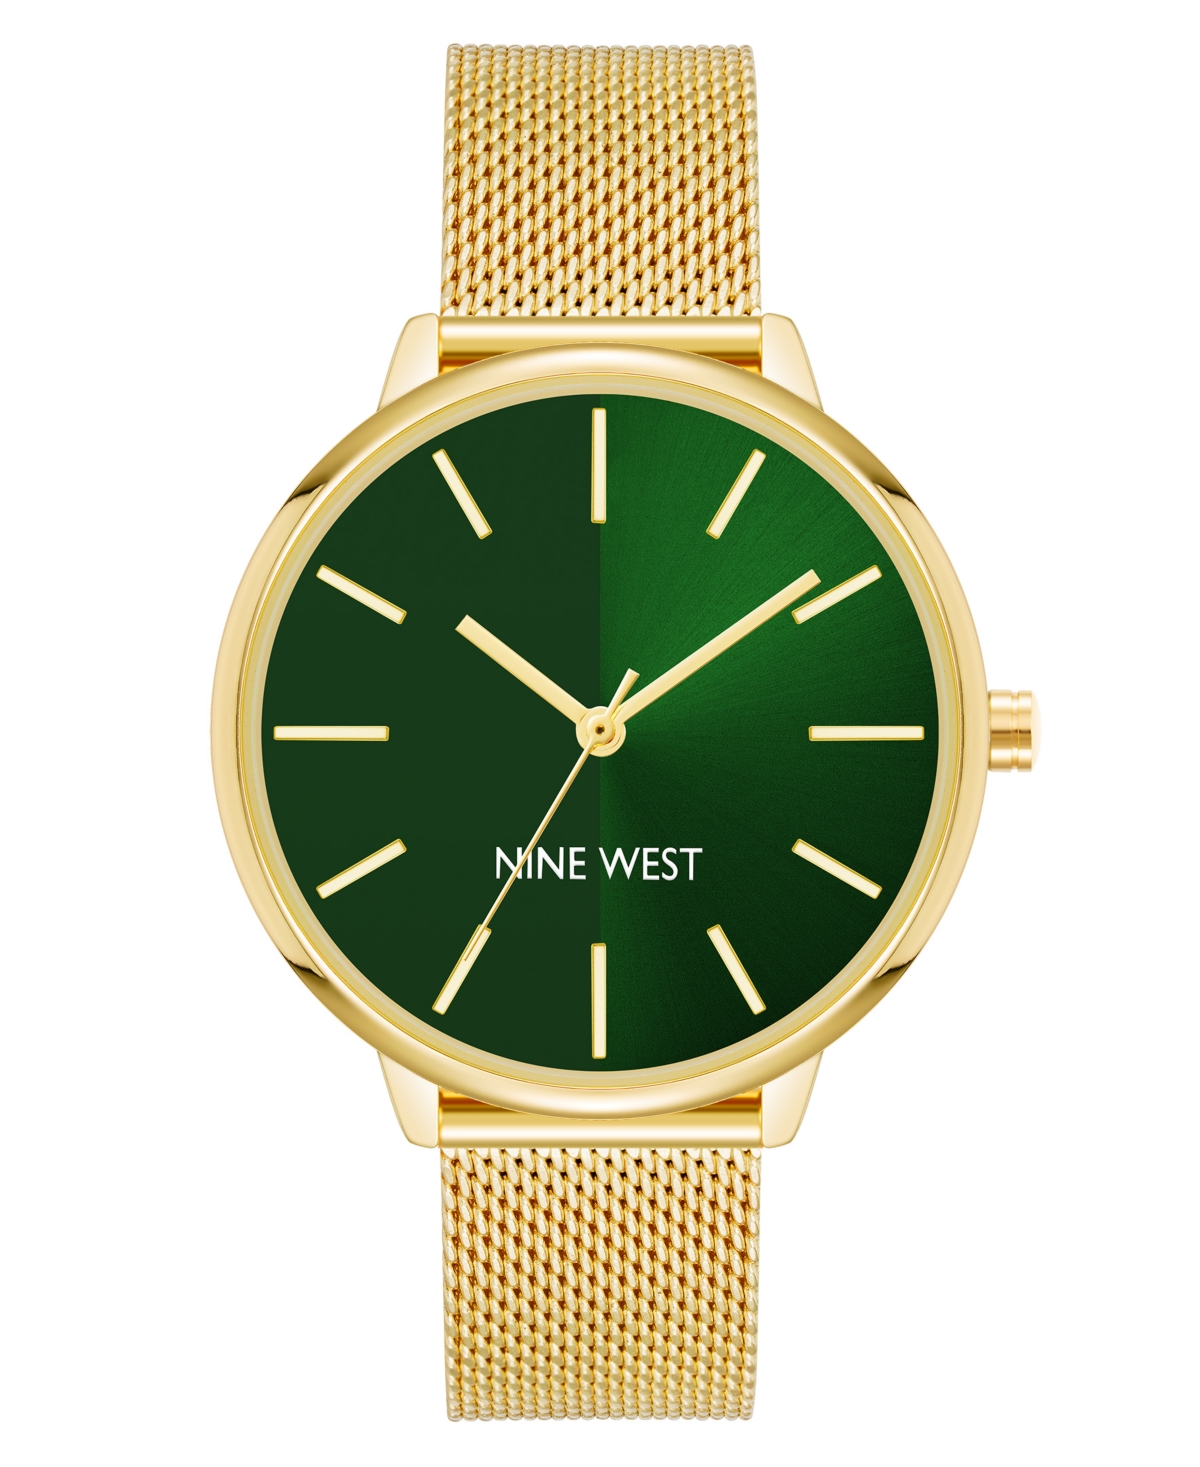 Nine West Women's Quartz Gold-tone Stainless Steel Mesh Band Watch, 40mm In Green,gold-tone